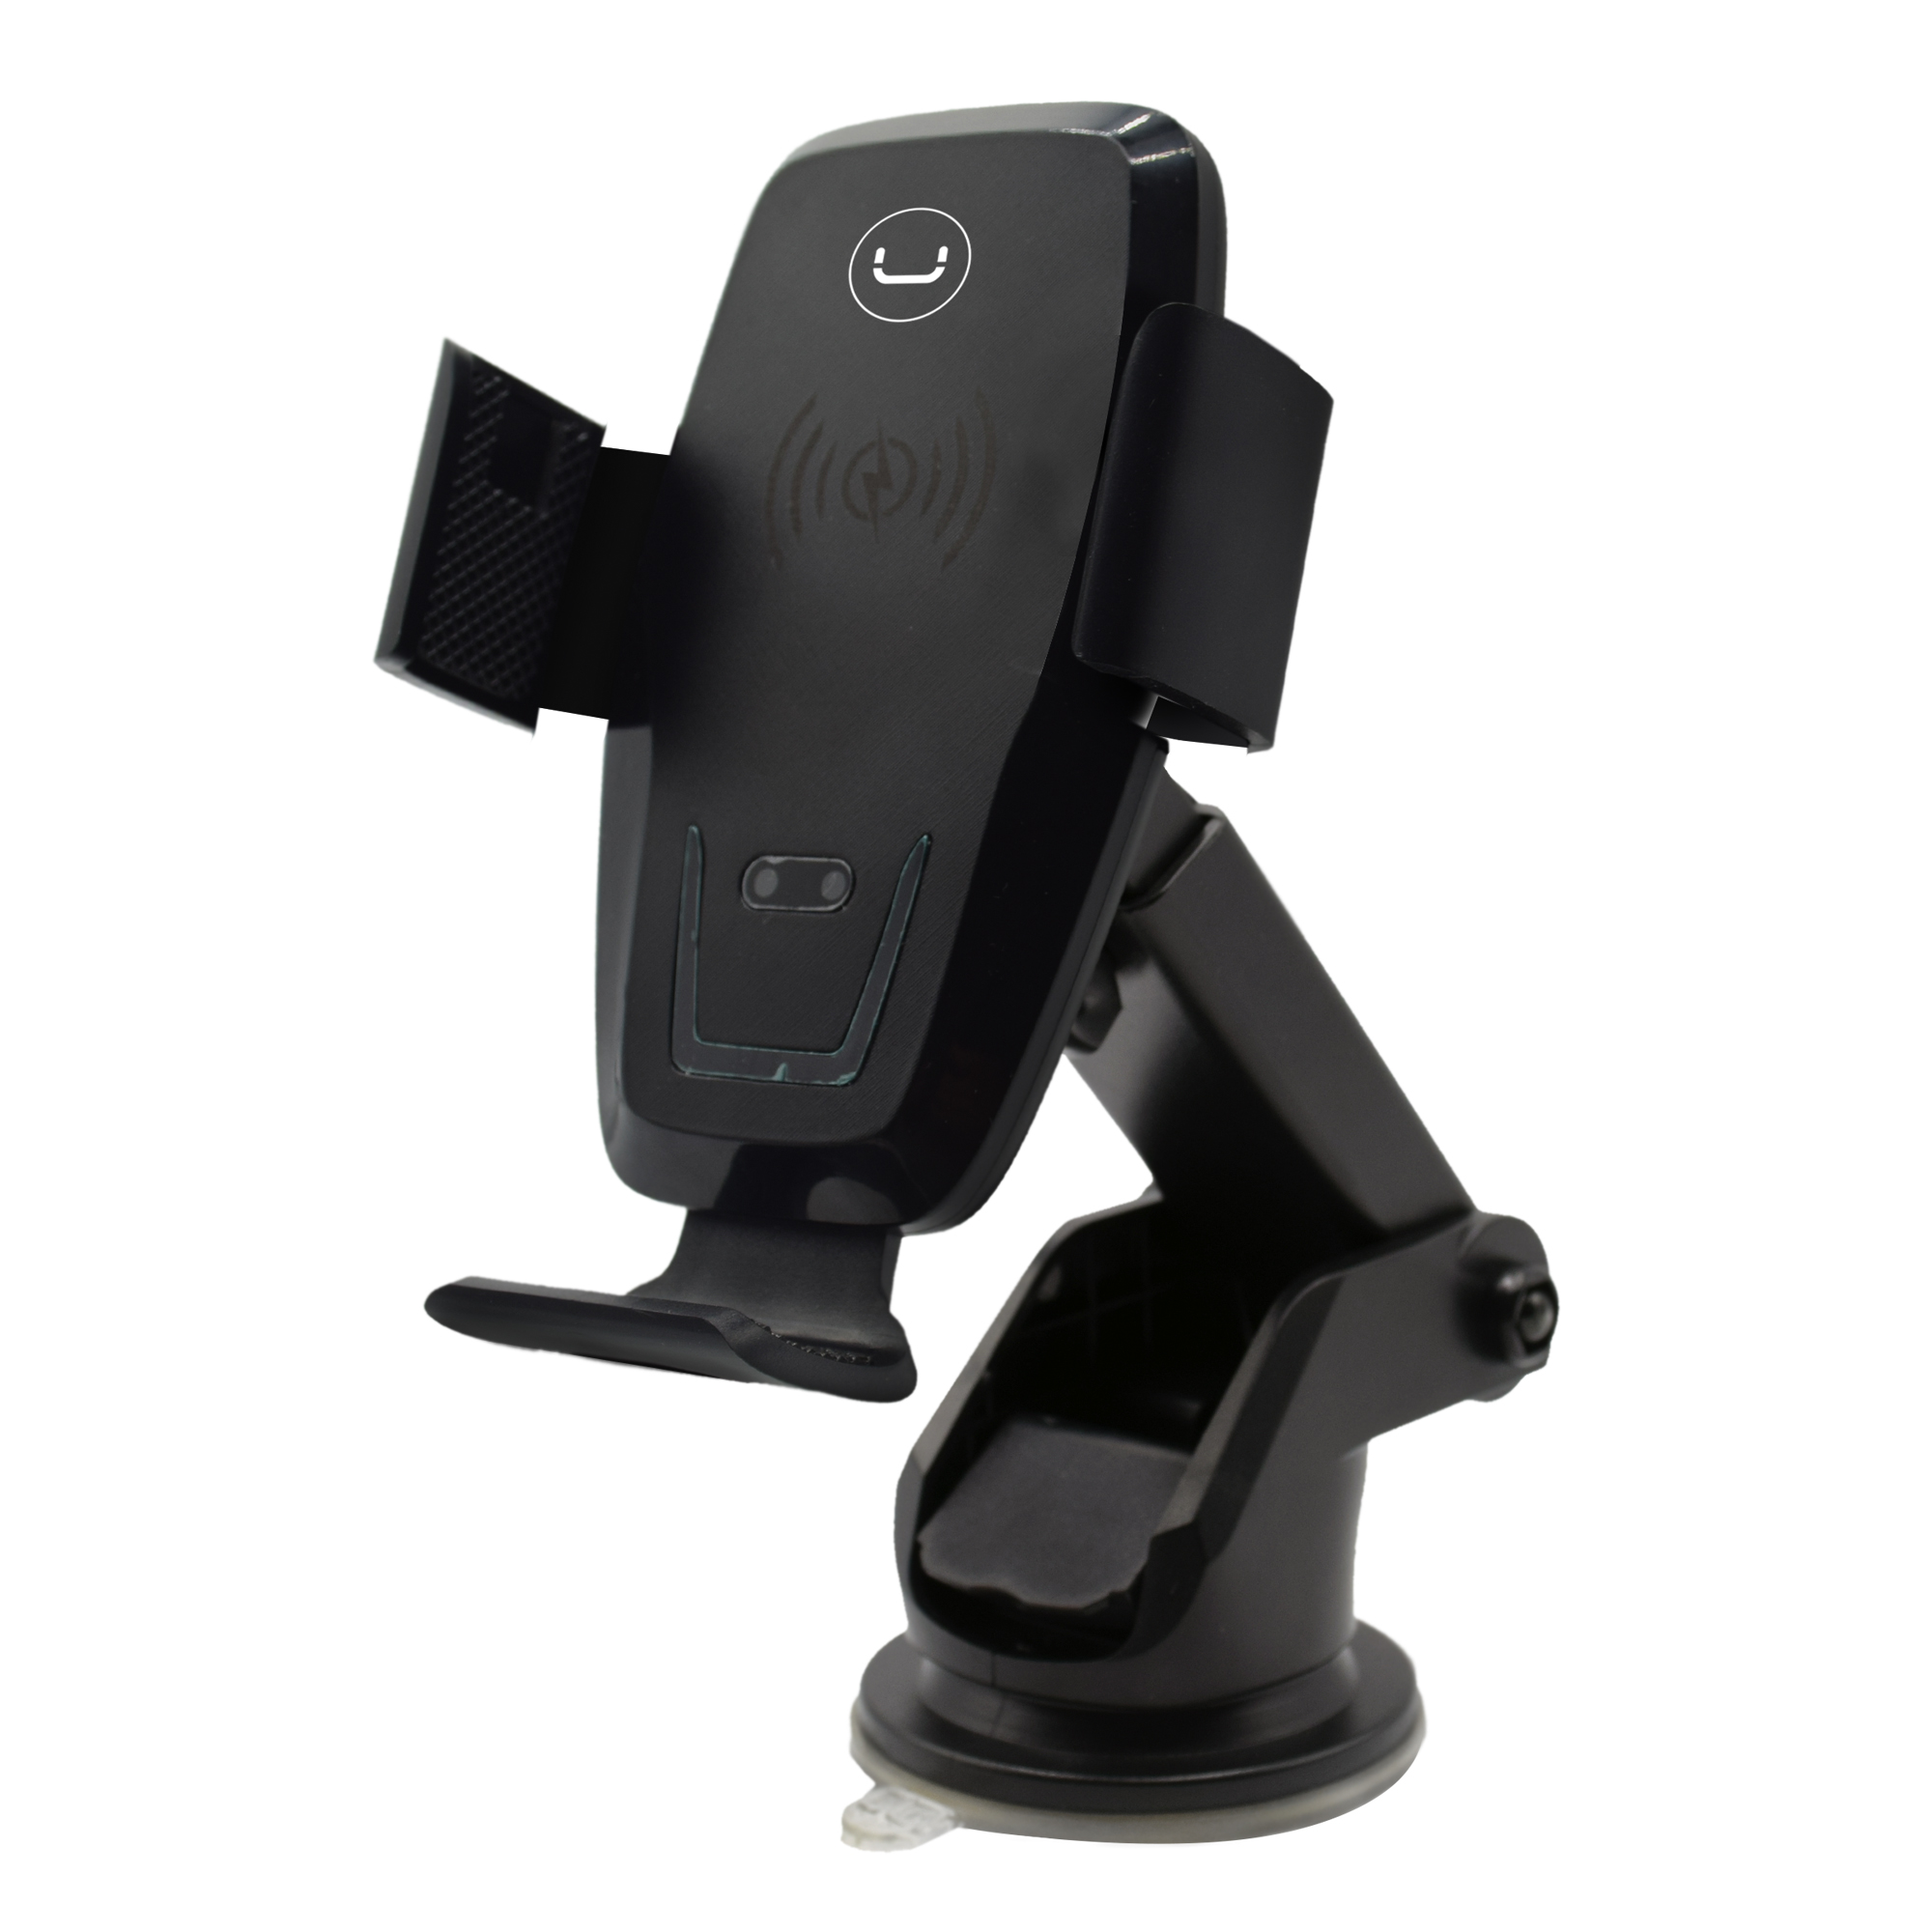 EXTENDABLE ARM CELL PHONE HOLDER W/ WIRELESS CHARGERCH3009BK